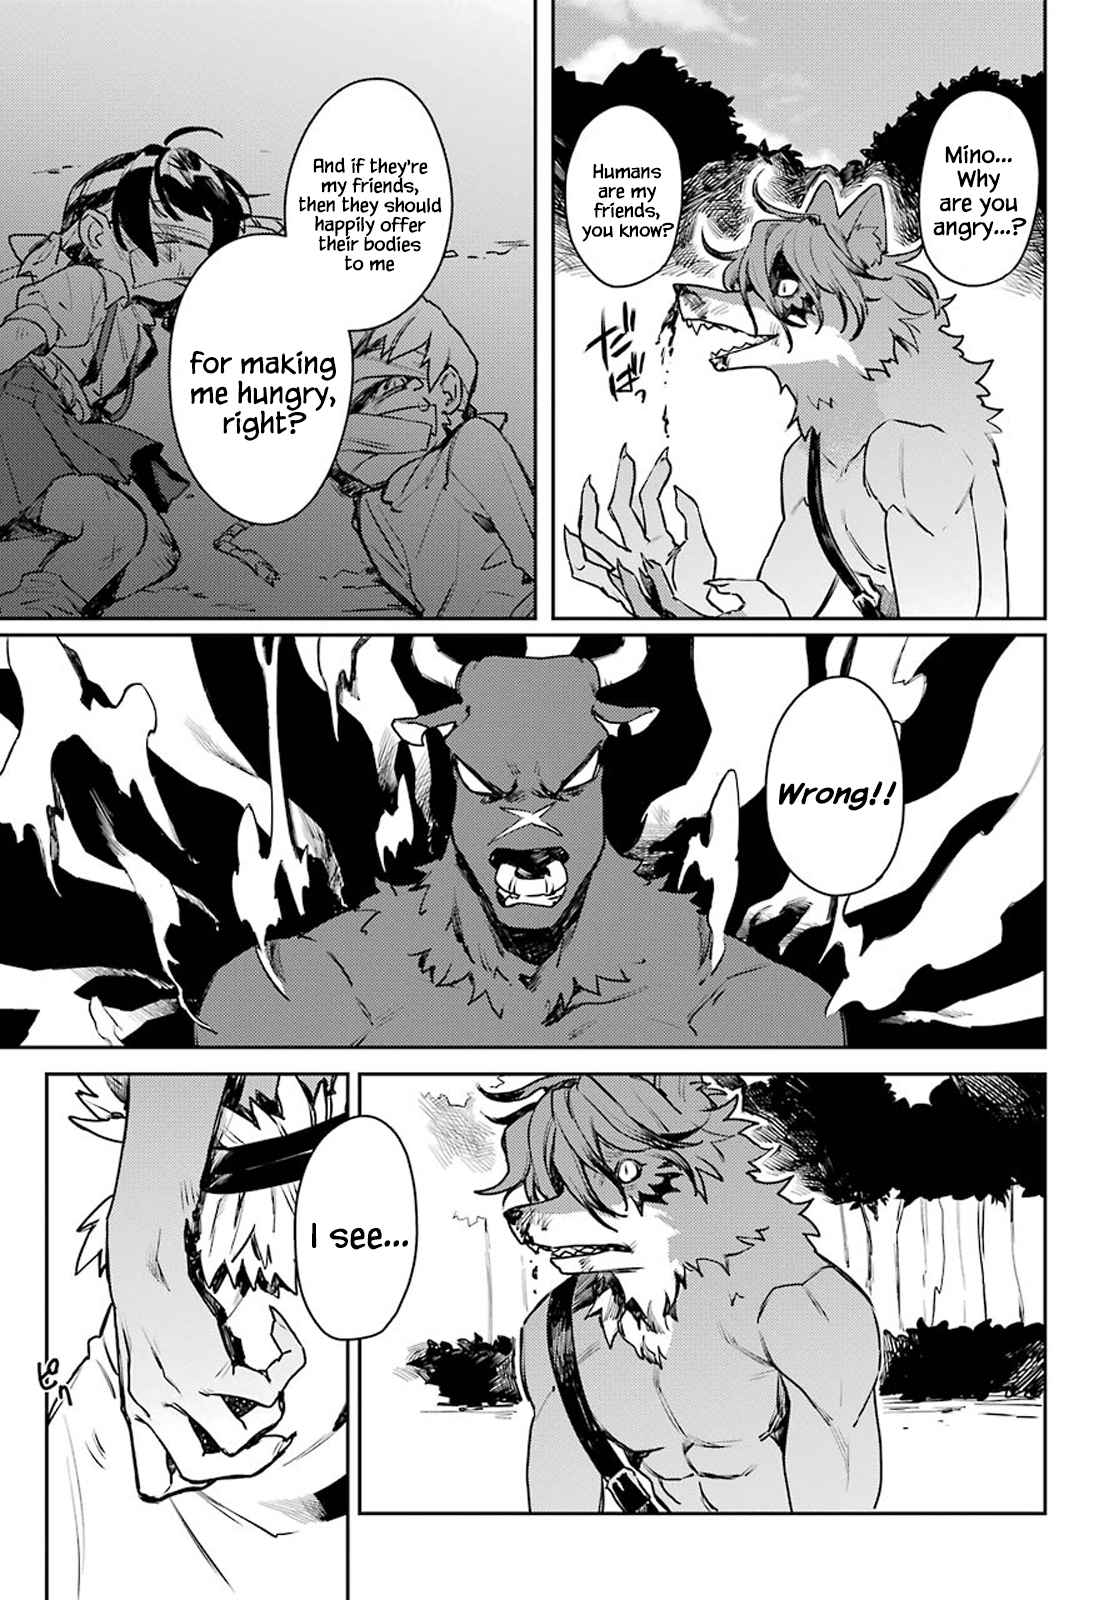 Minotaurus's Sweetheart Ch. 8 Even Though We're Friends